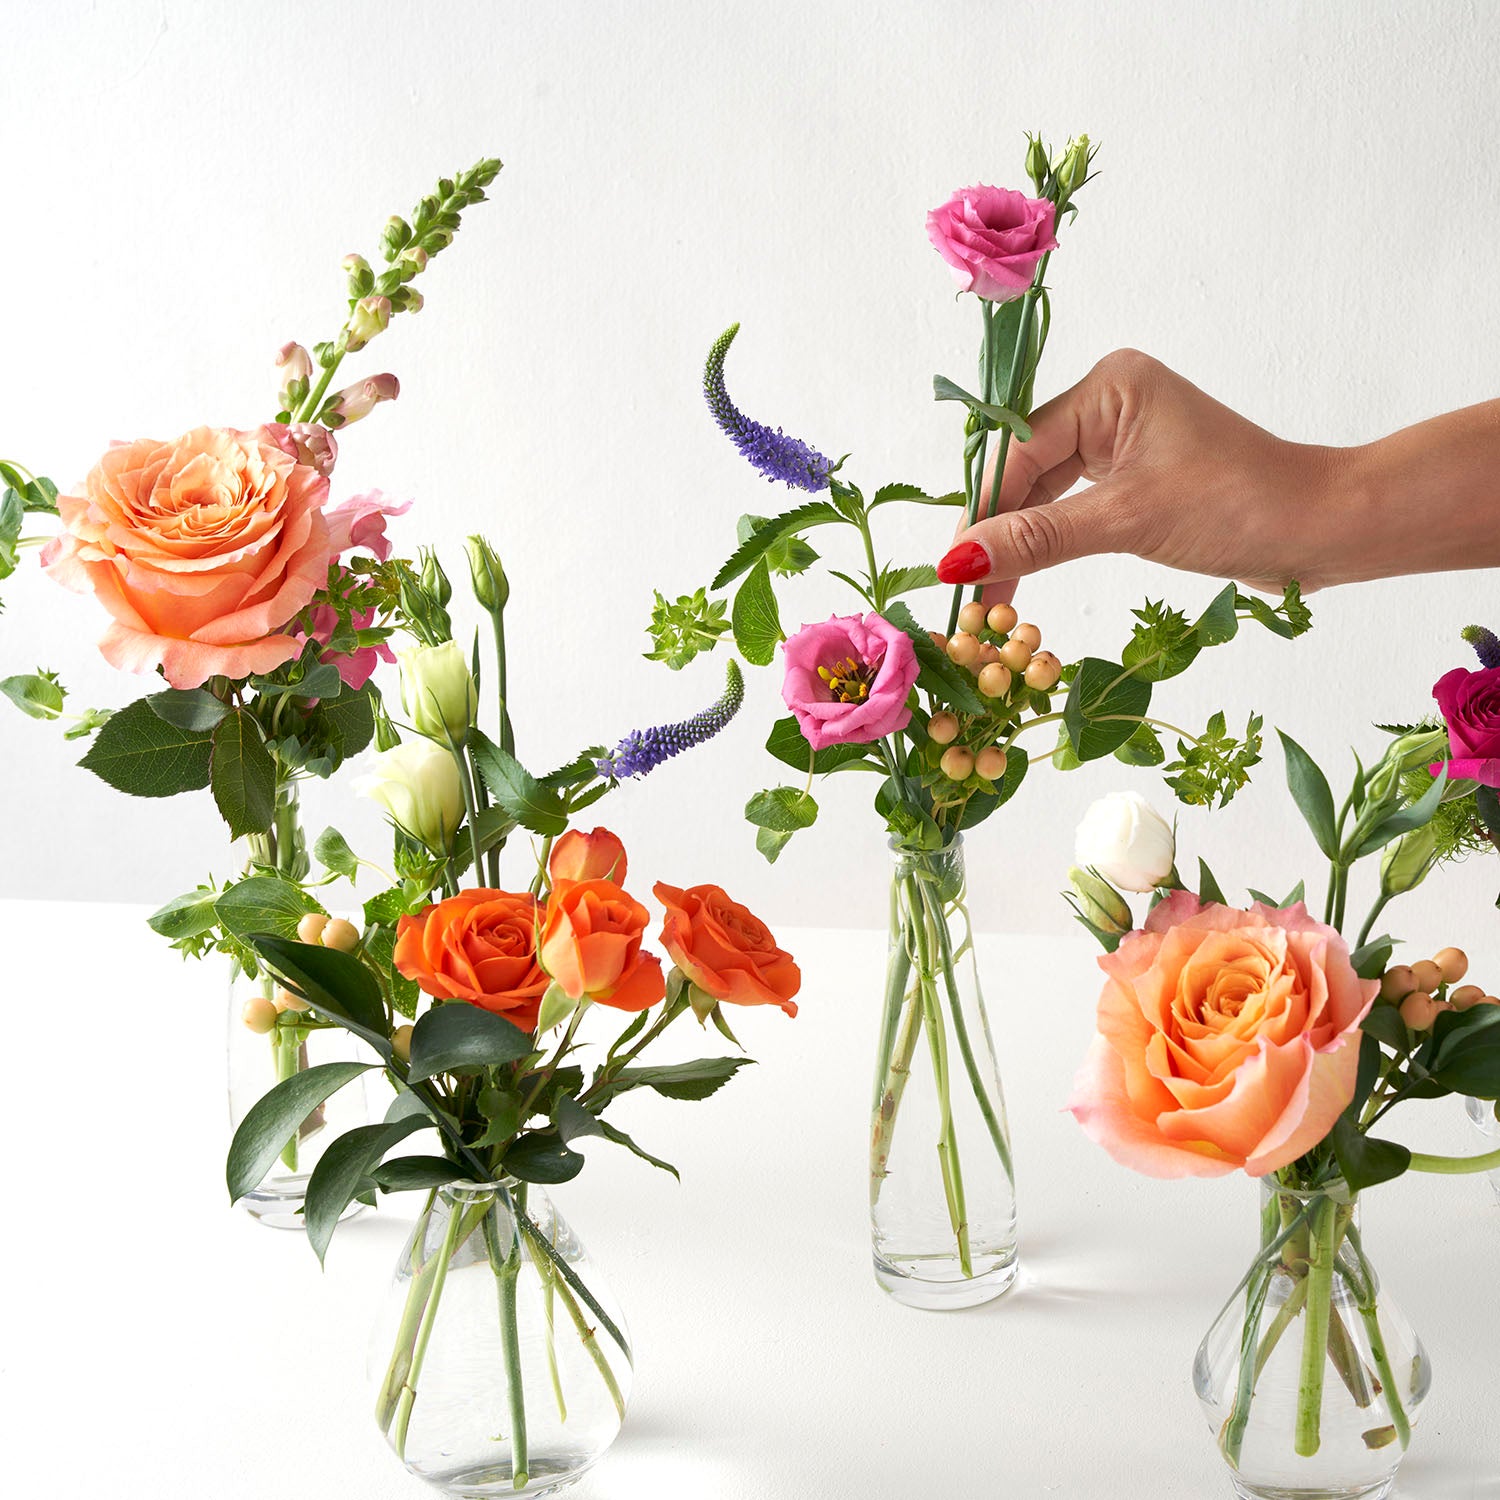 Four small glass vases filled with orange, pink, and purple flower, hand coming from right side adjusting flowers,on white background.